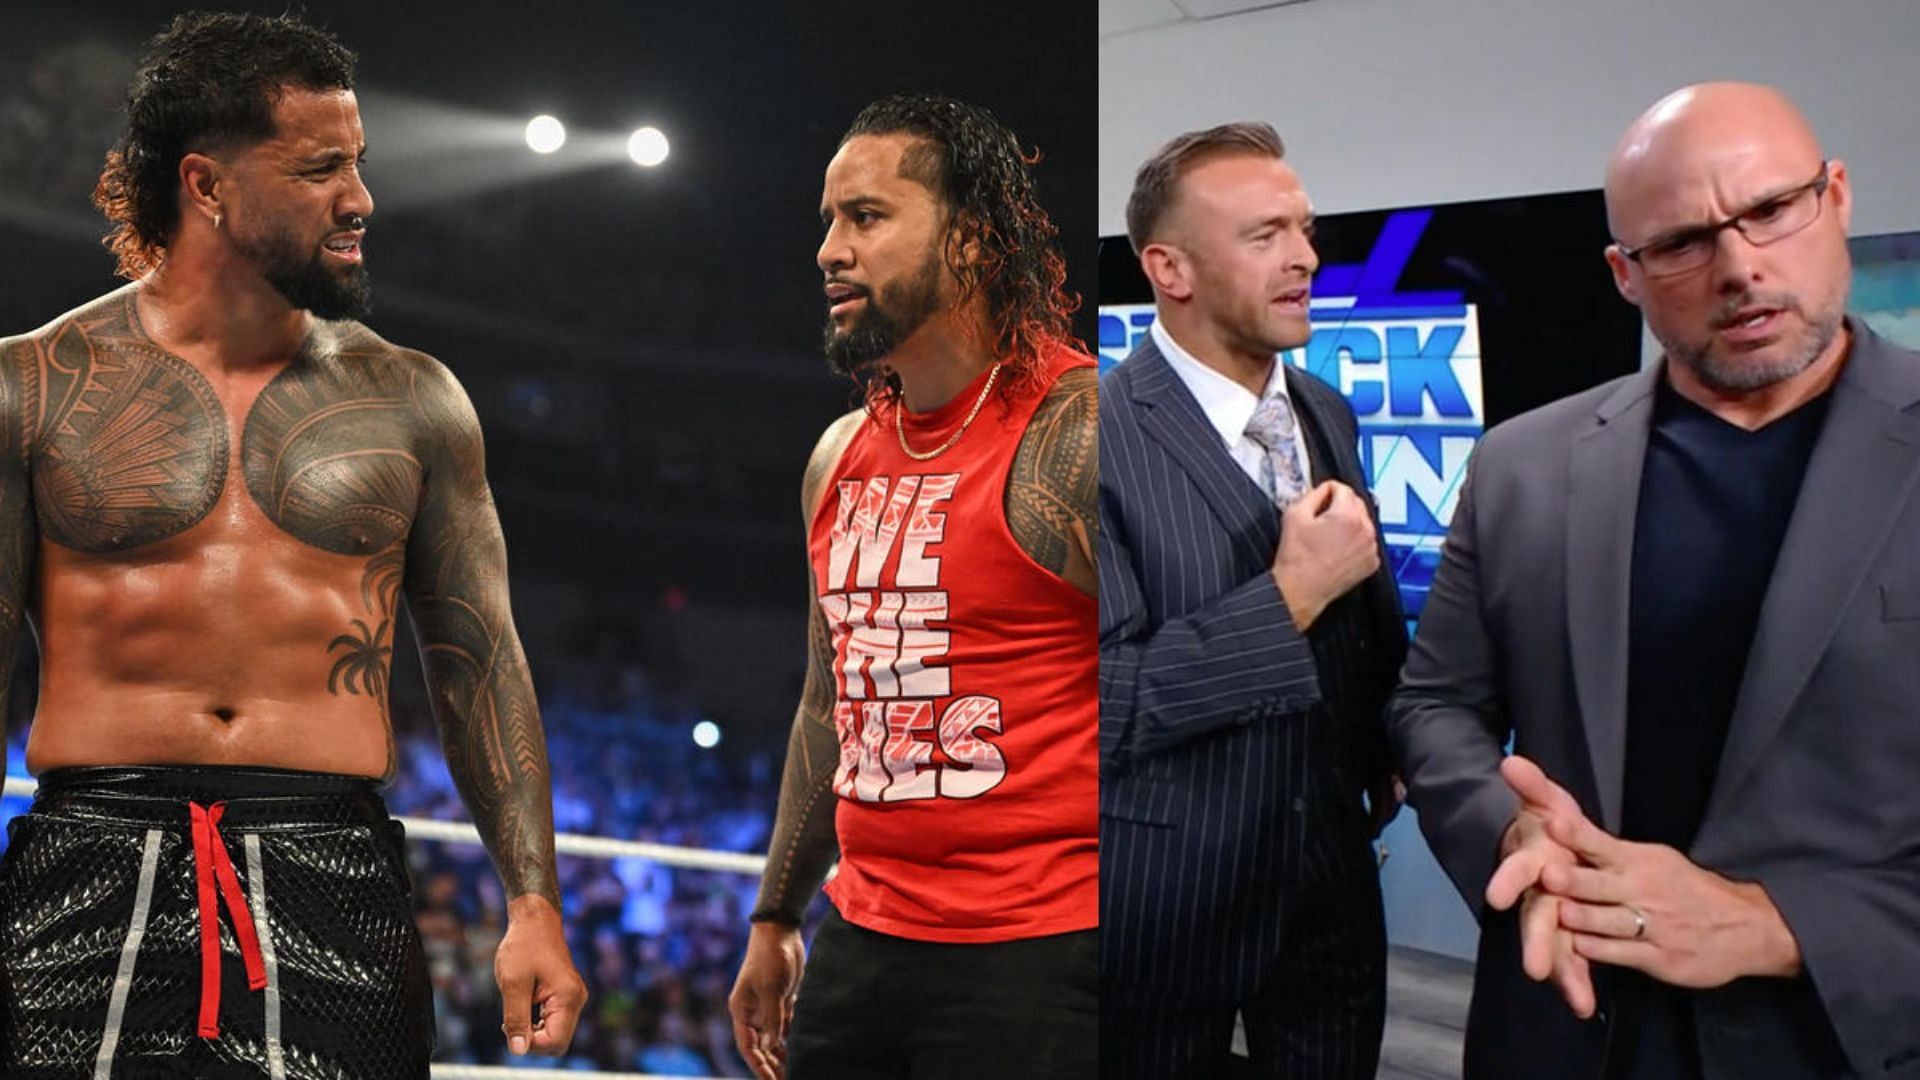 Jimmy and Jey Uso may clash in War Games.